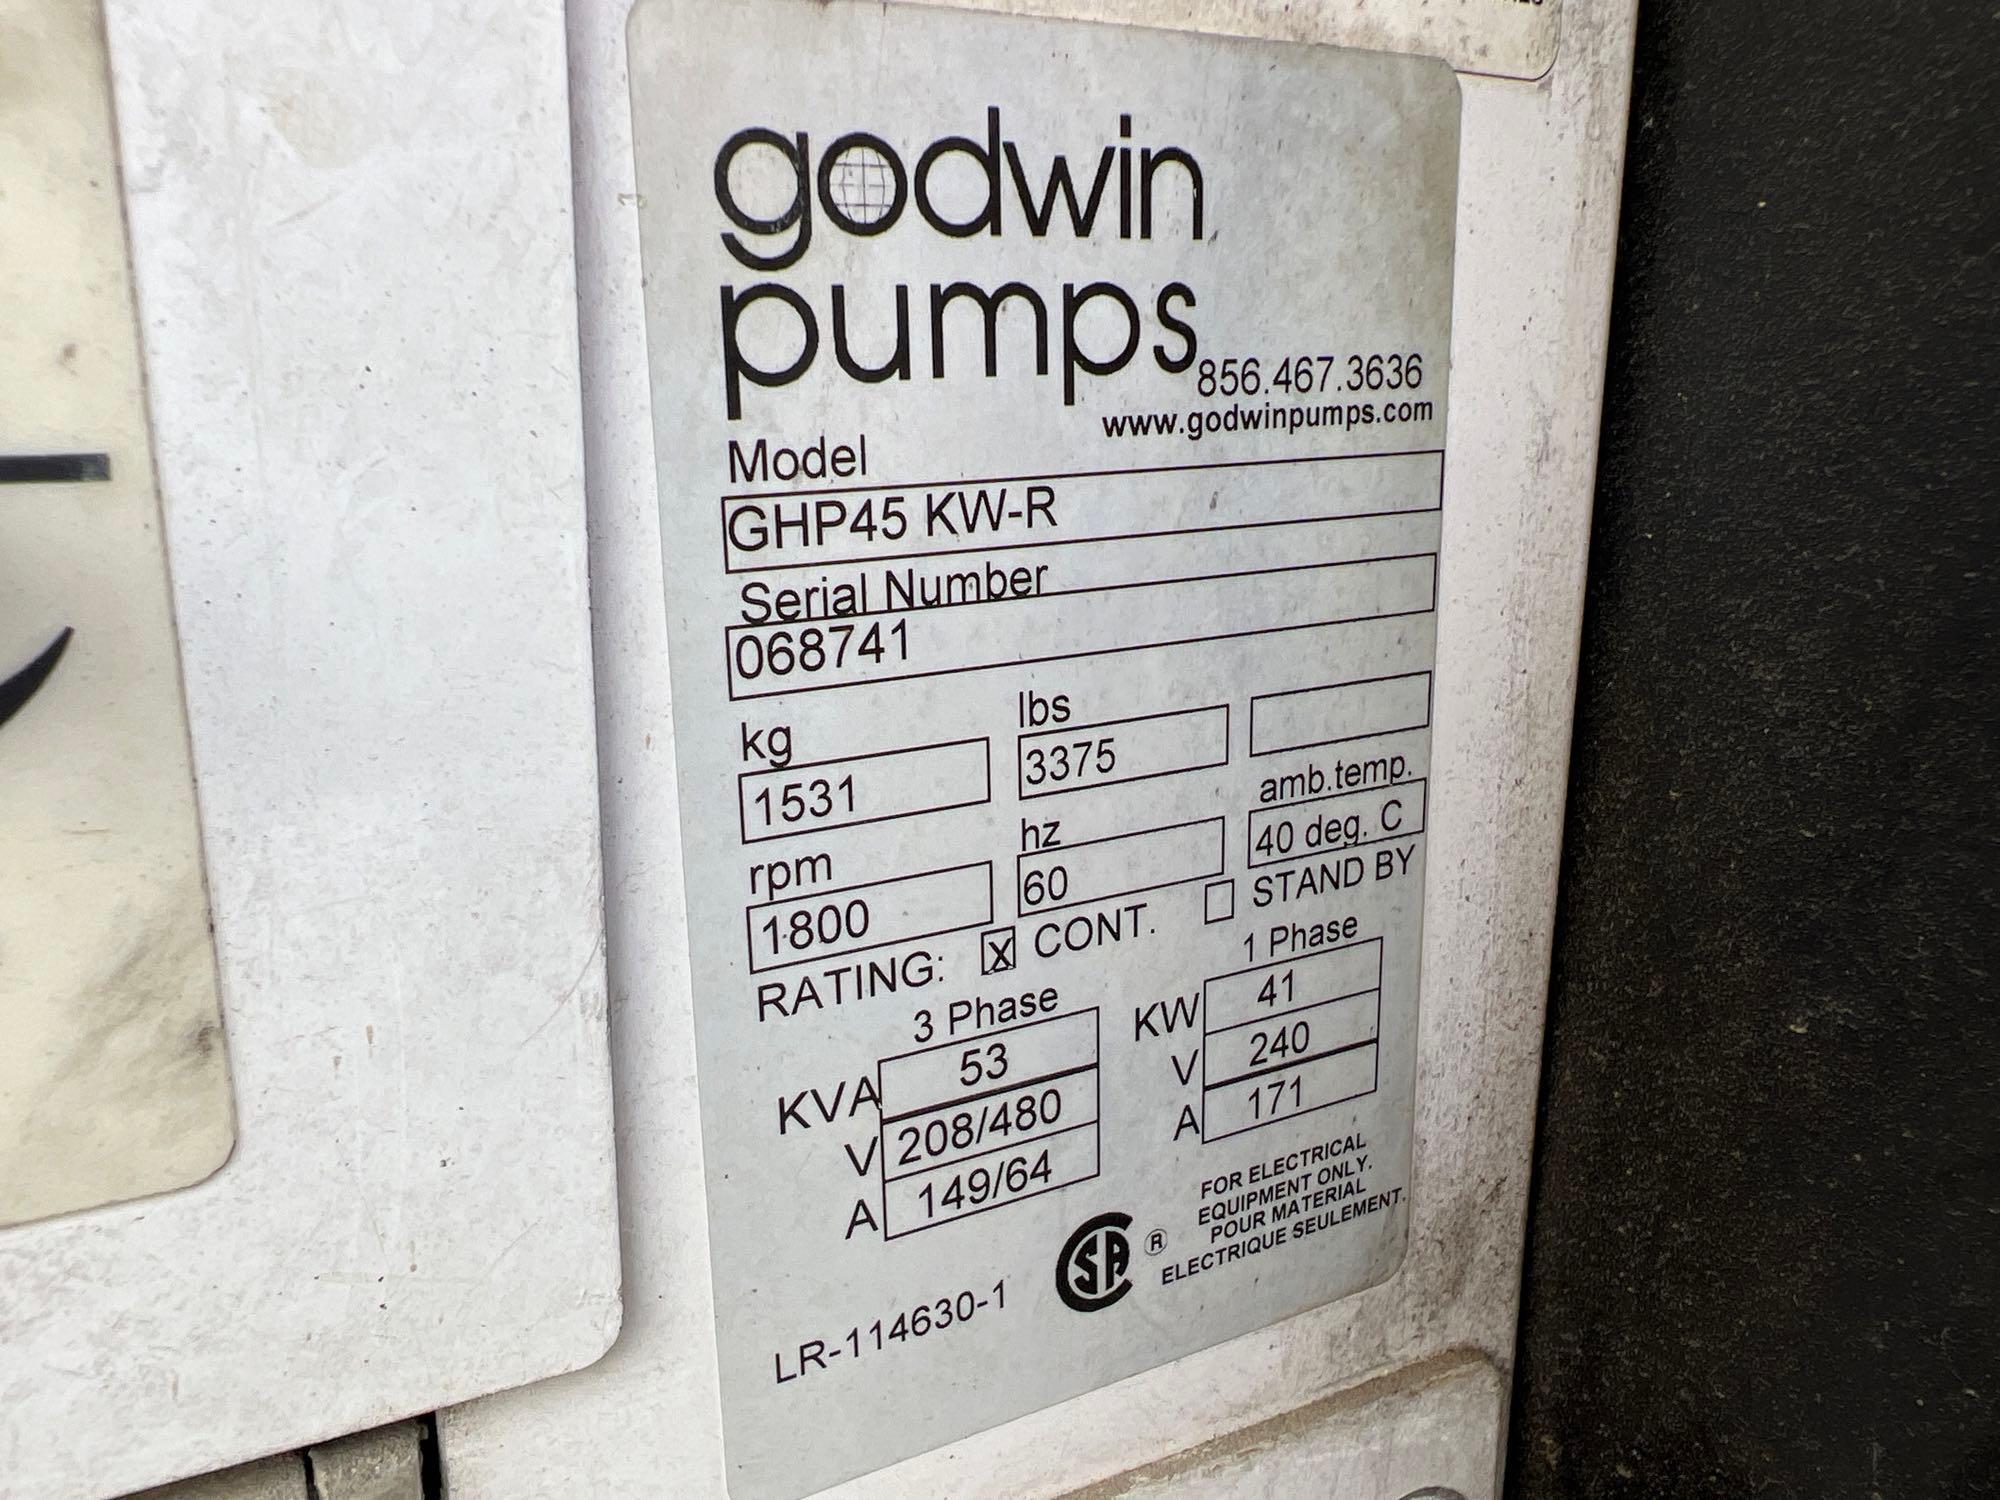 GODWIN GHP45 KW-R GENERATOR SN:68741 powered by diesel engine, equipped with 53KVA, 41KW, trailer